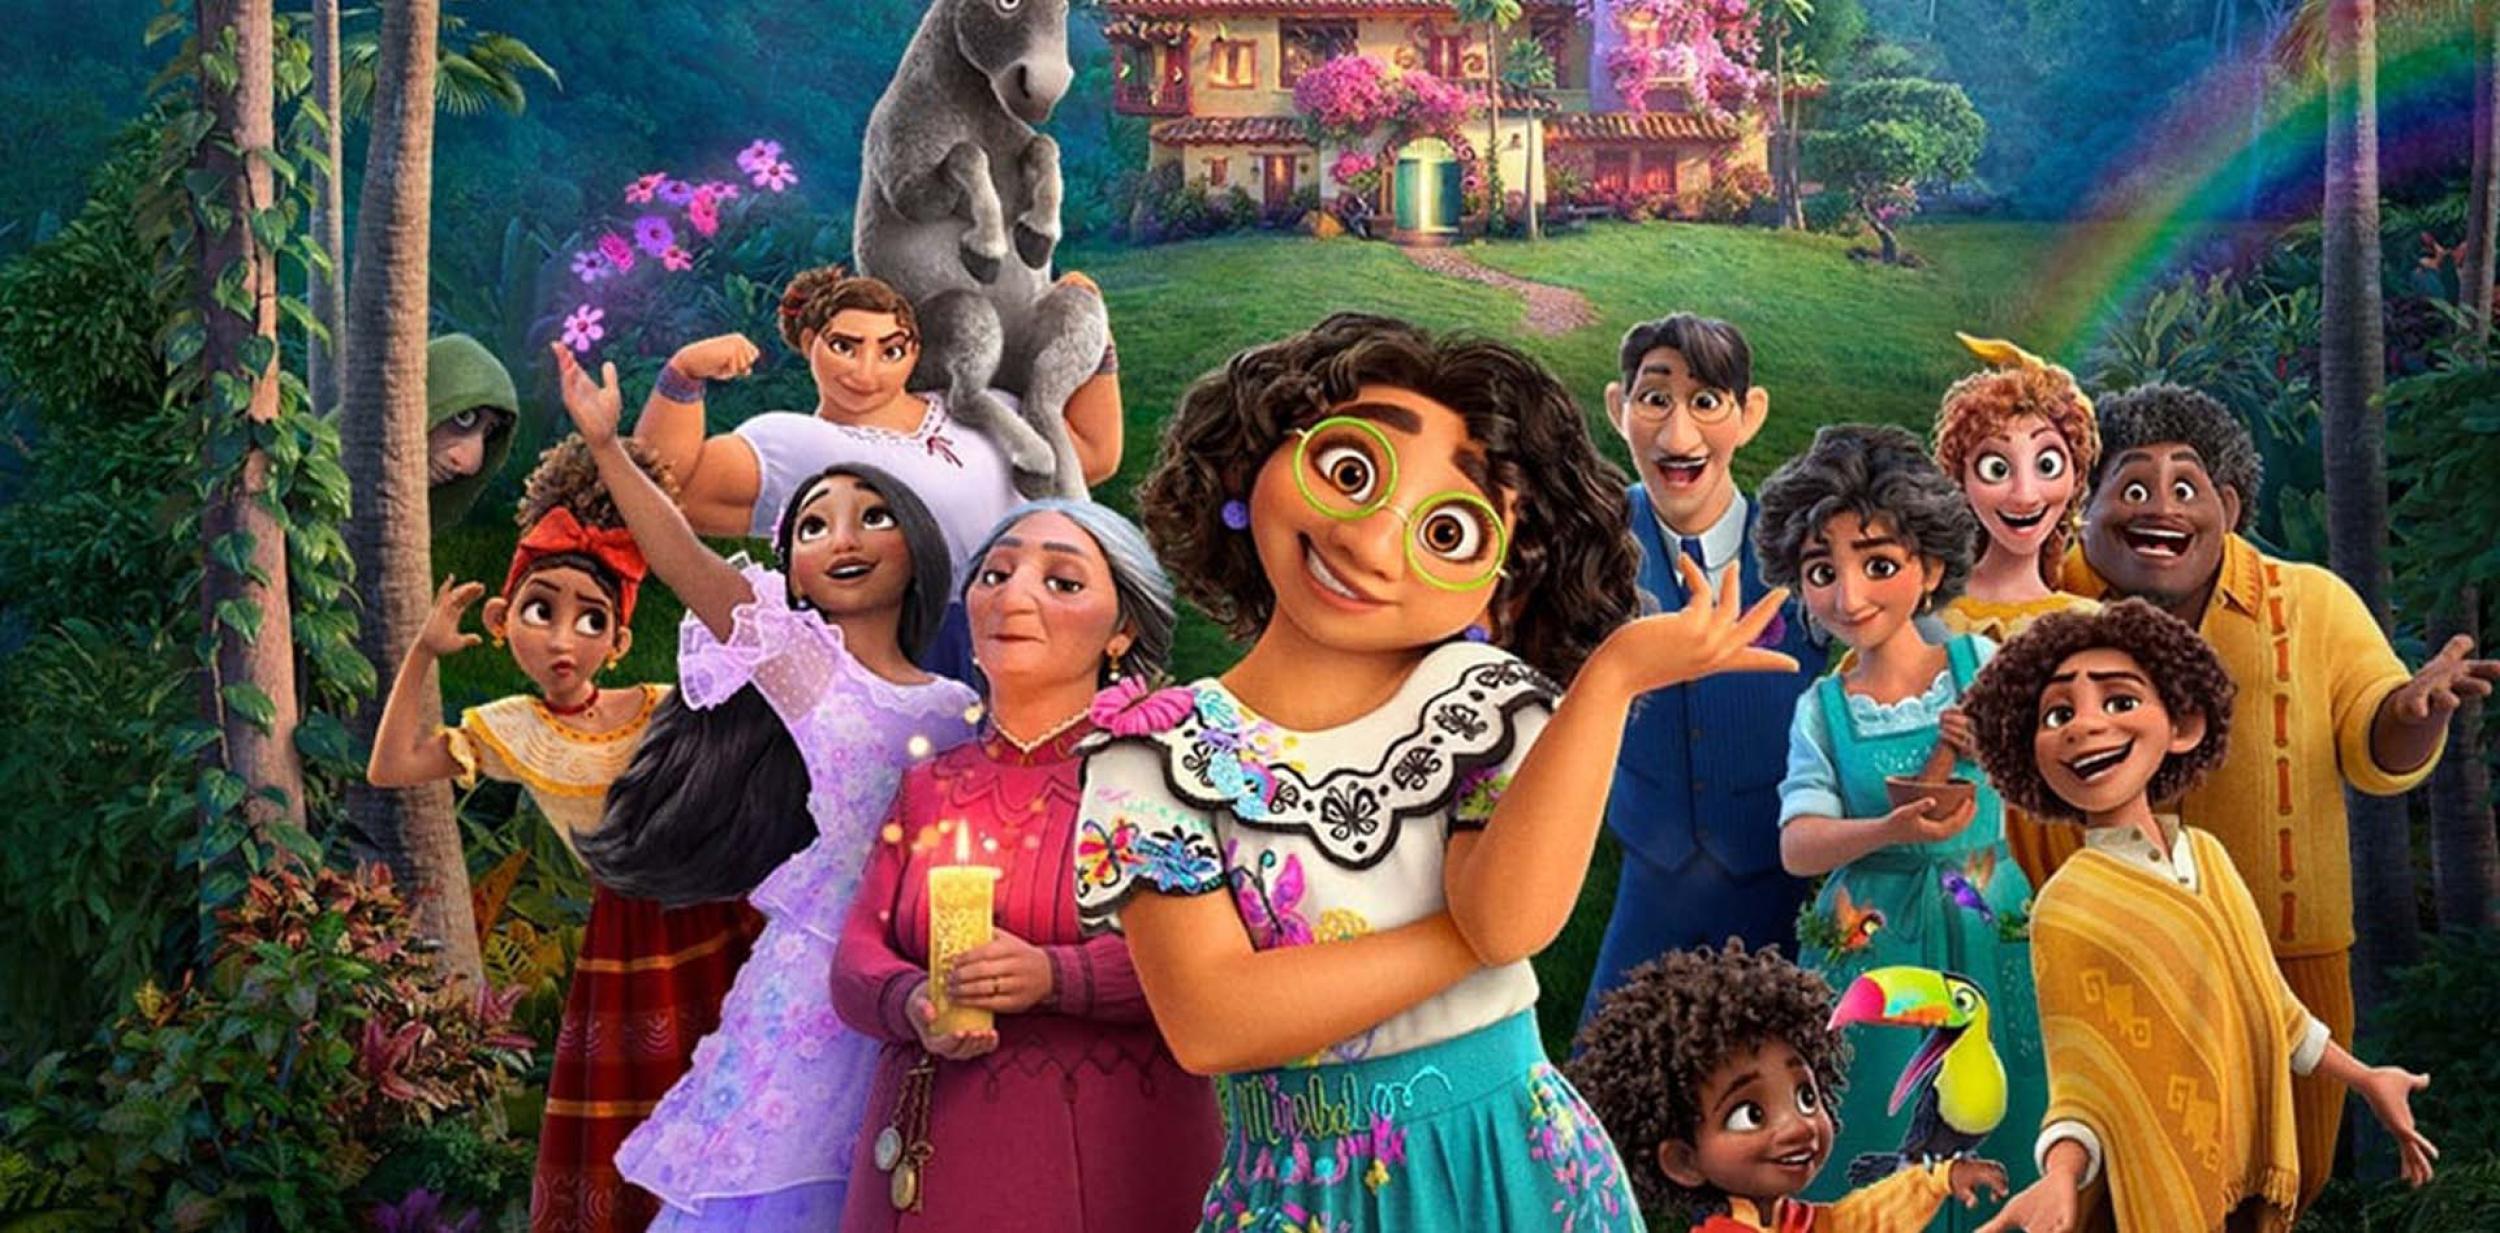 Illustration of the cartoon characters of the film Encanto